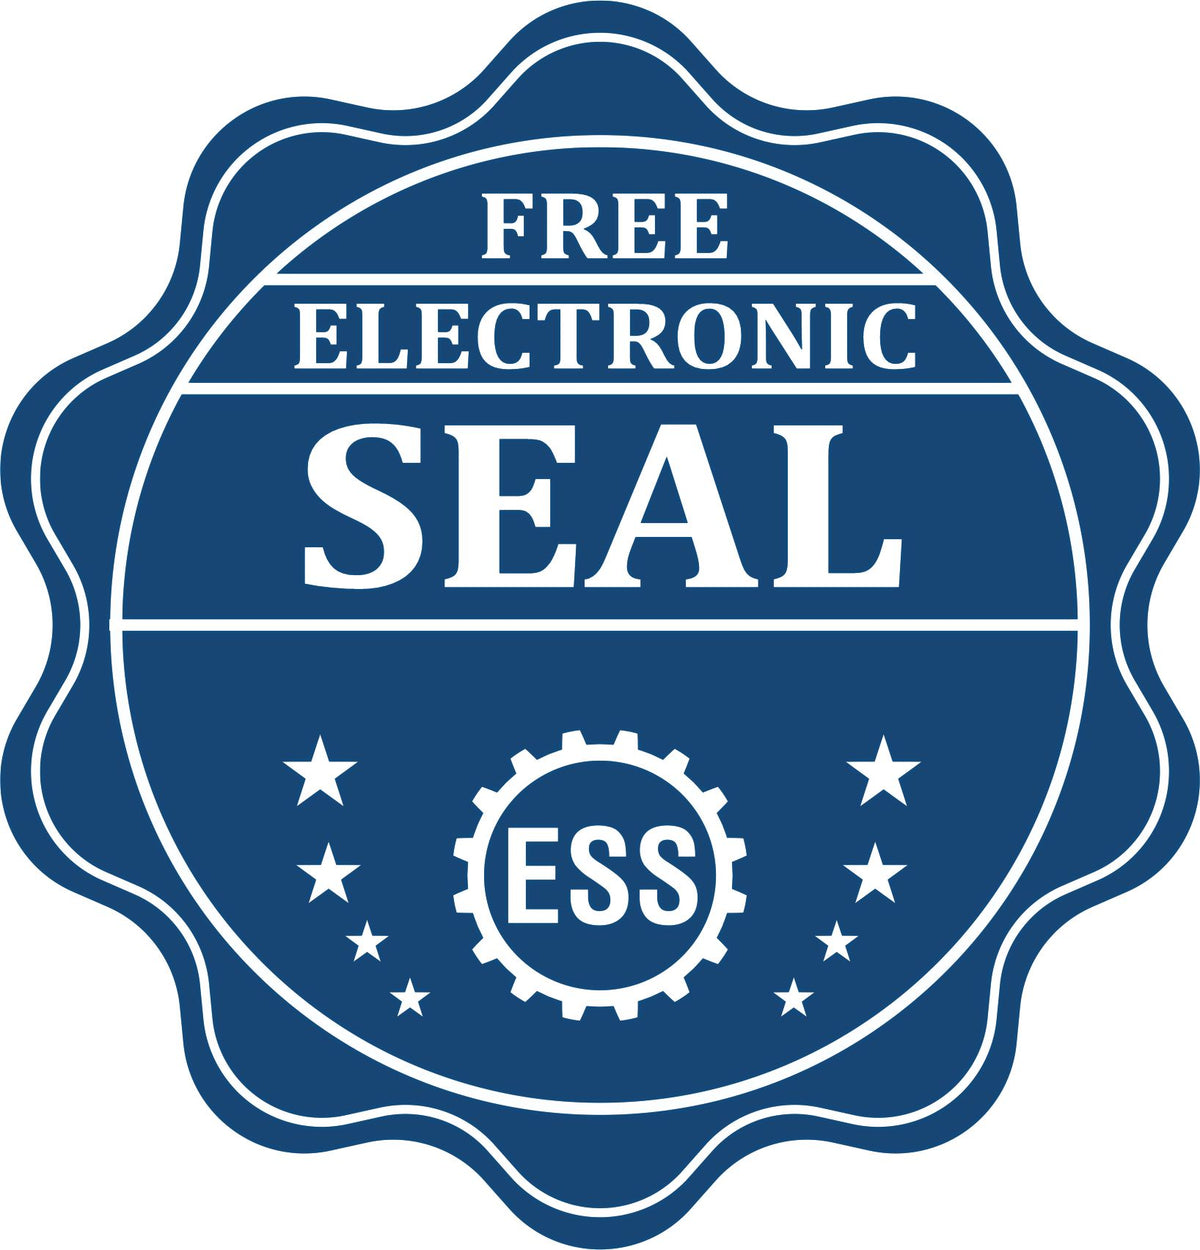 A badge showing a free electronic seal for the Heavy Duty Cast Iron New York Engineer Seal Embosser with stars and the ESS gear on the emblem.